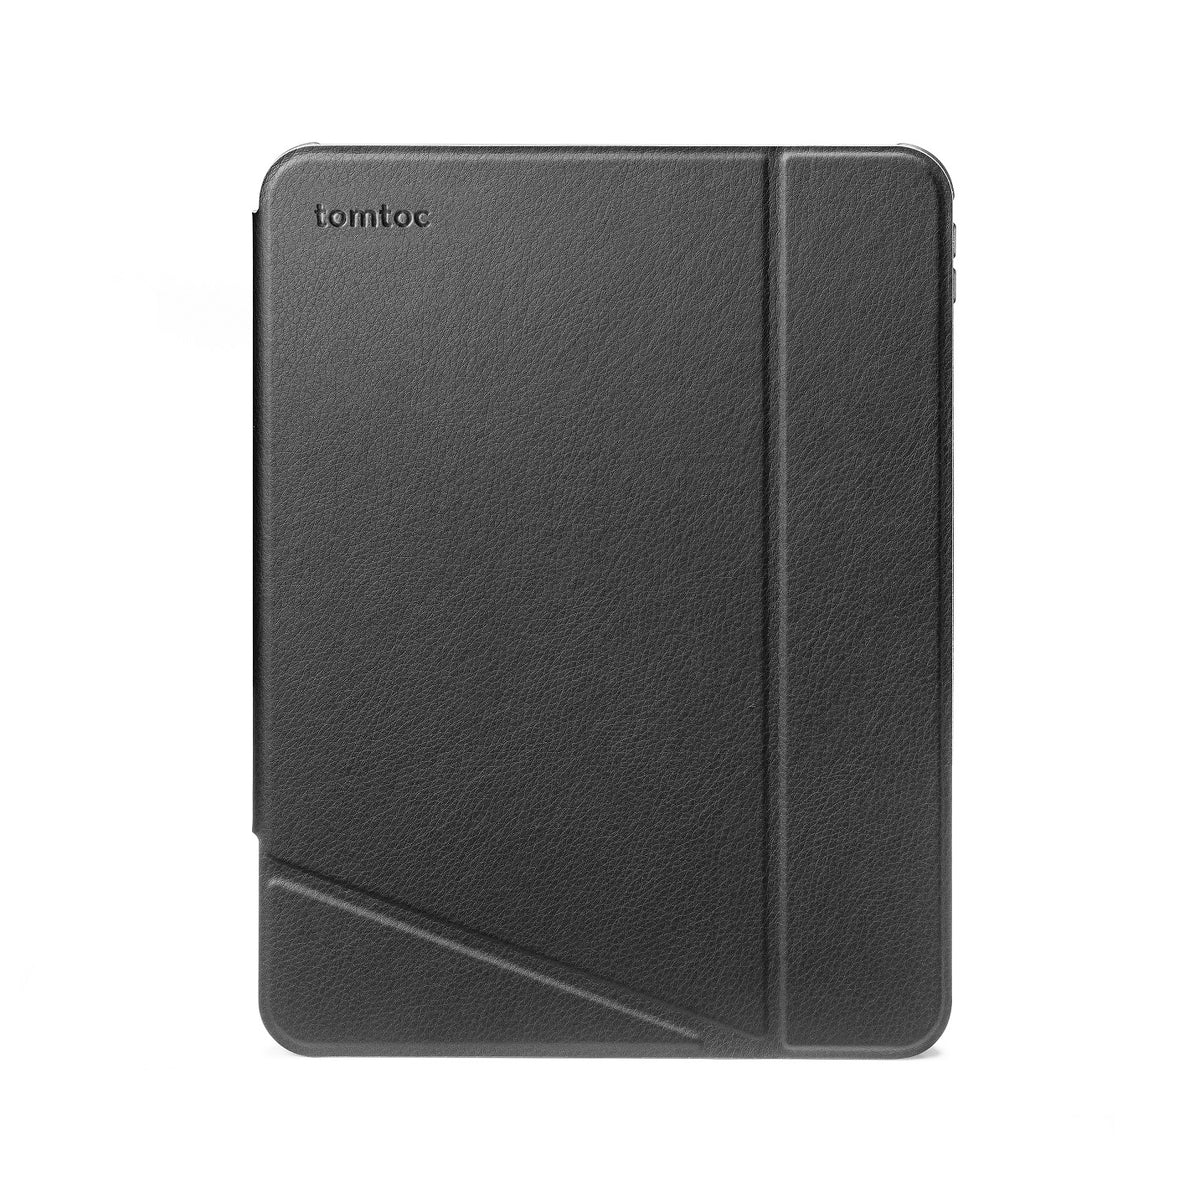 tomtoc 10.9 Inch Vertical iPad Tri-Mode Case with iPad Pencil Holder - Black